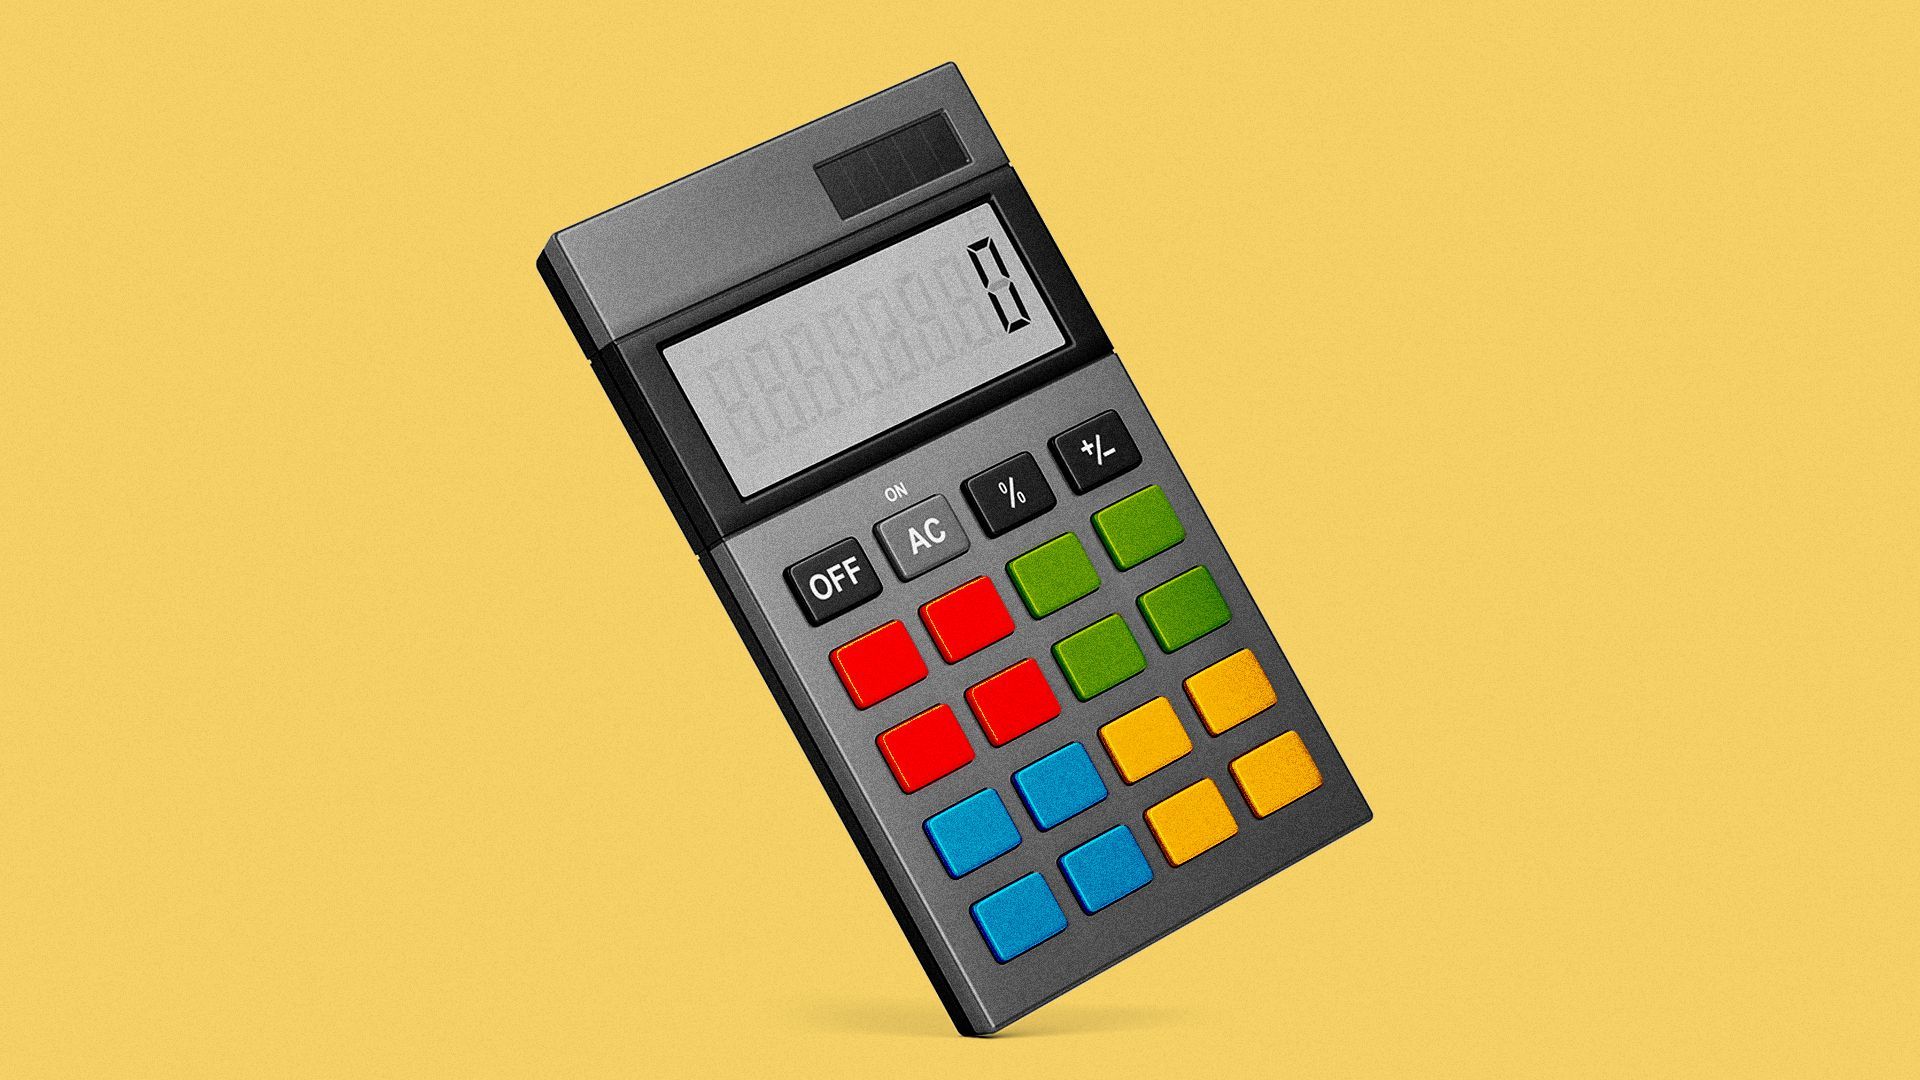 Illustration of a calculator with colorful buttons that make up the squares of the Microsoft logo